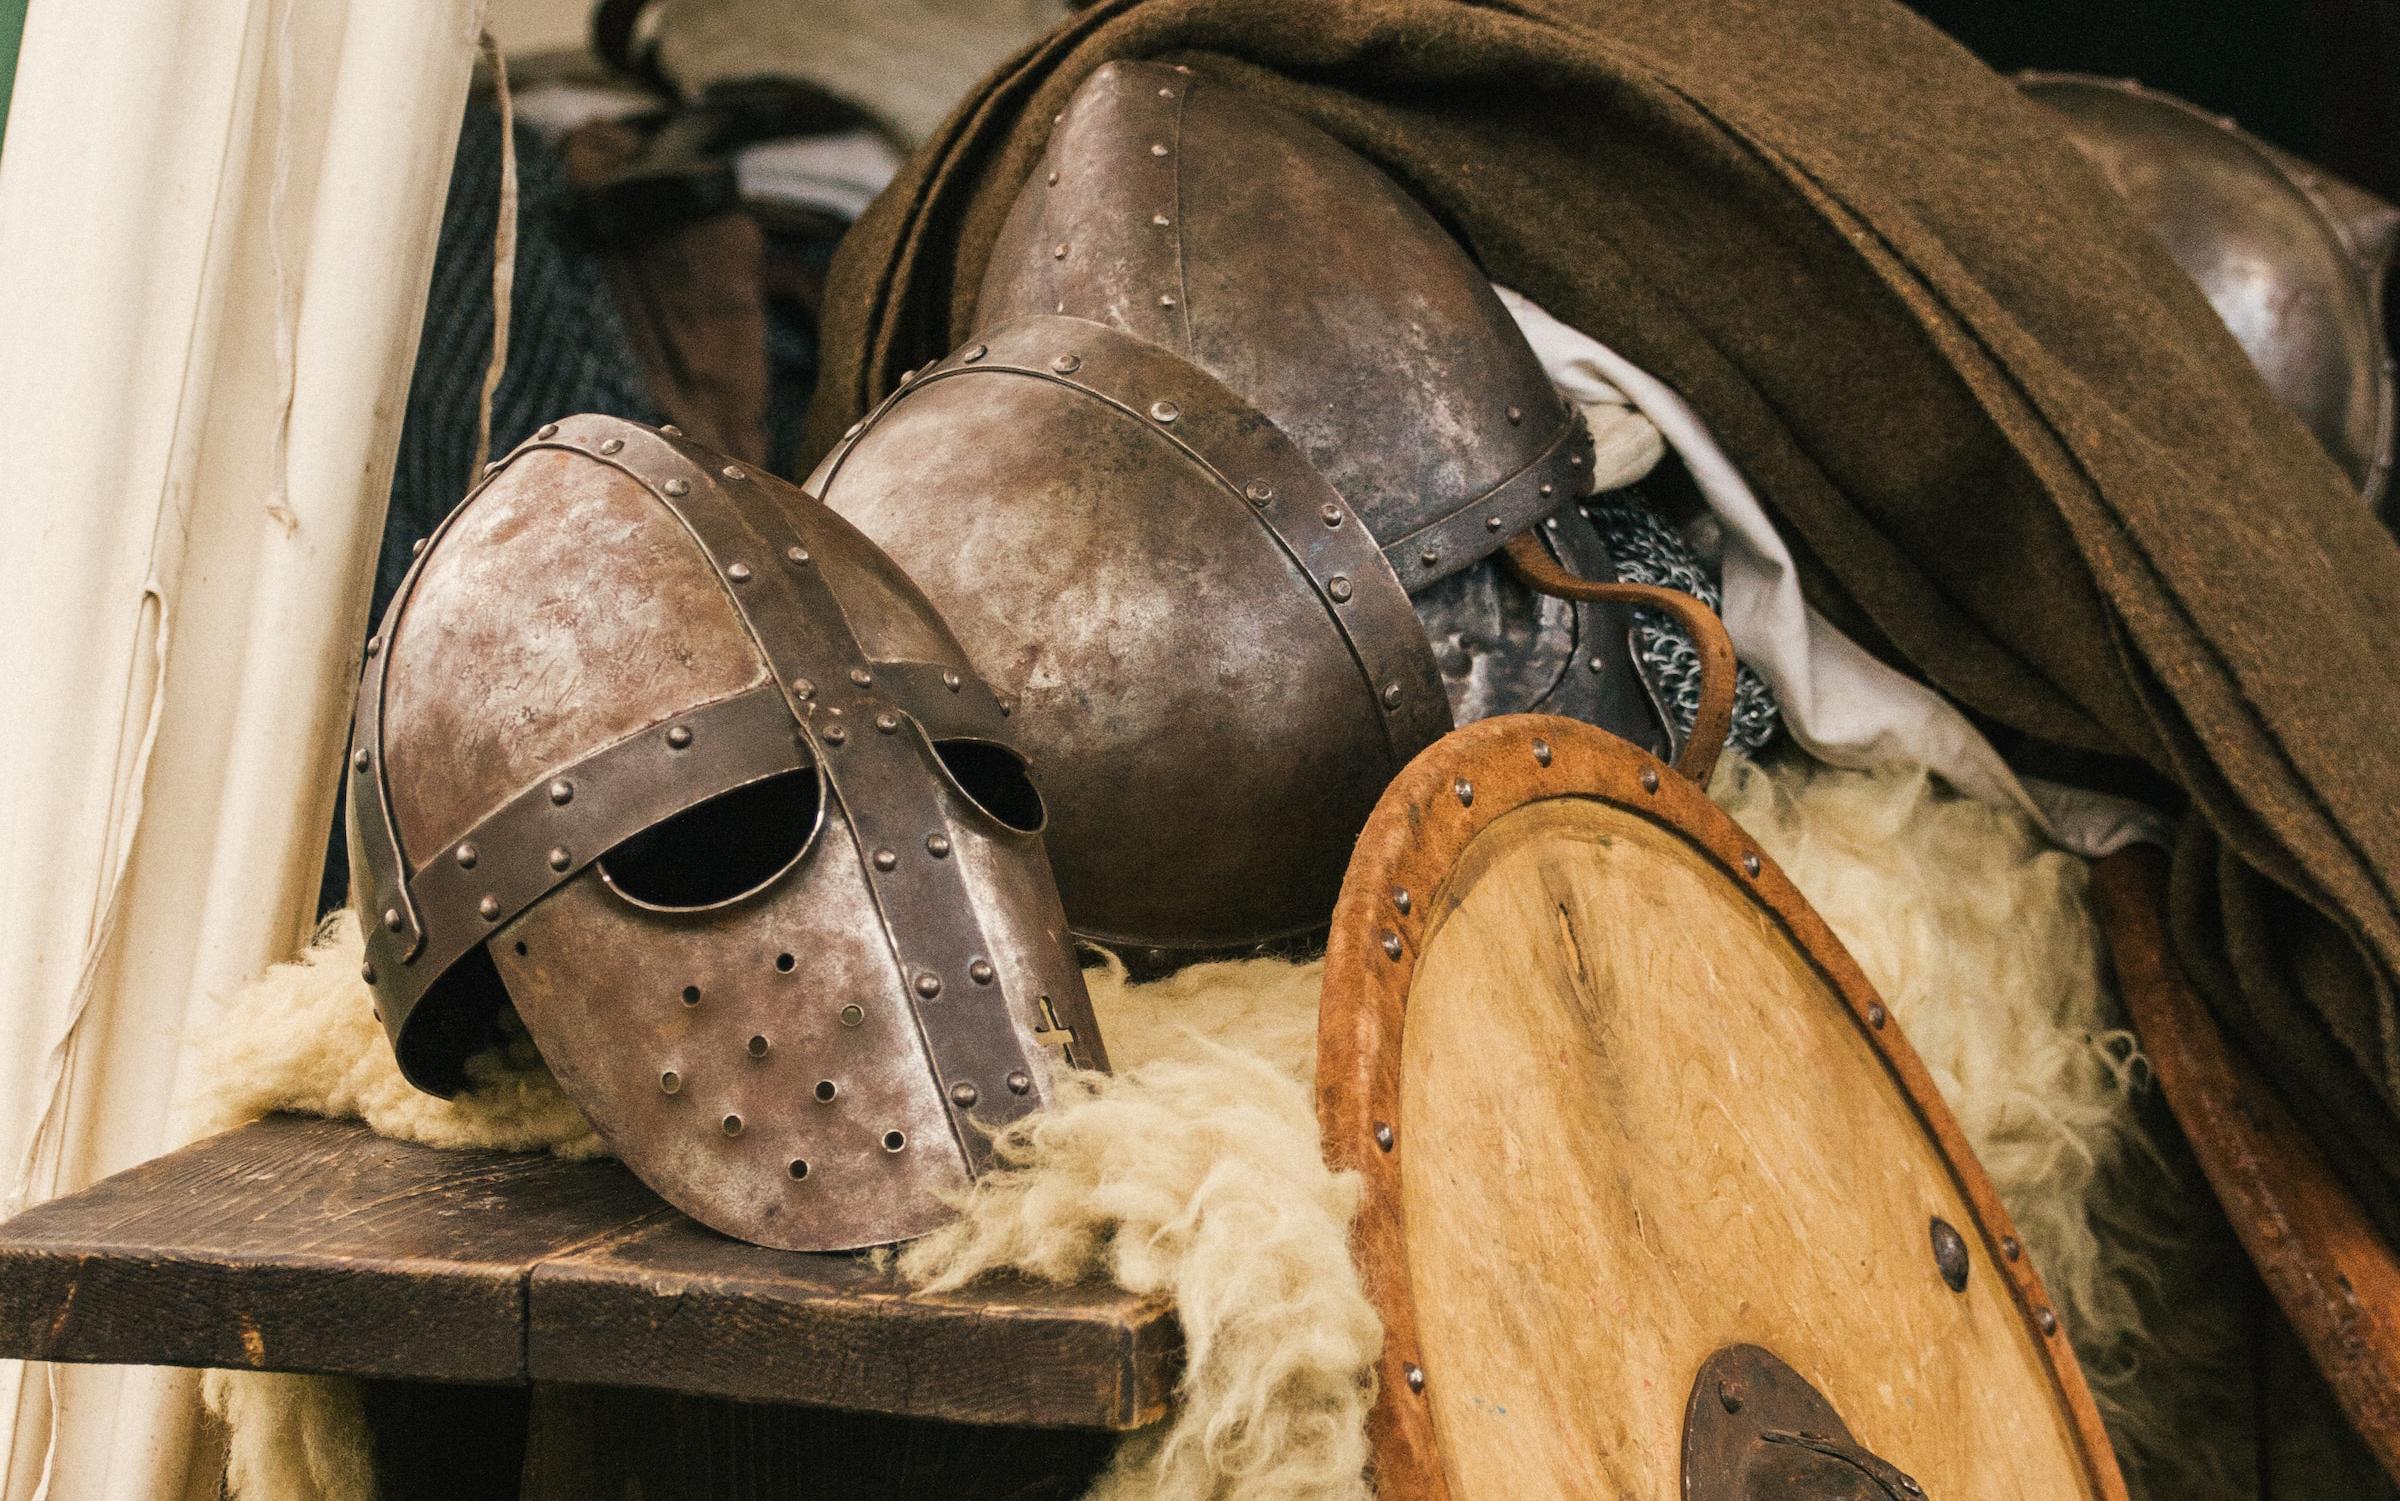 Medieval helmets and shields on an old wooden table